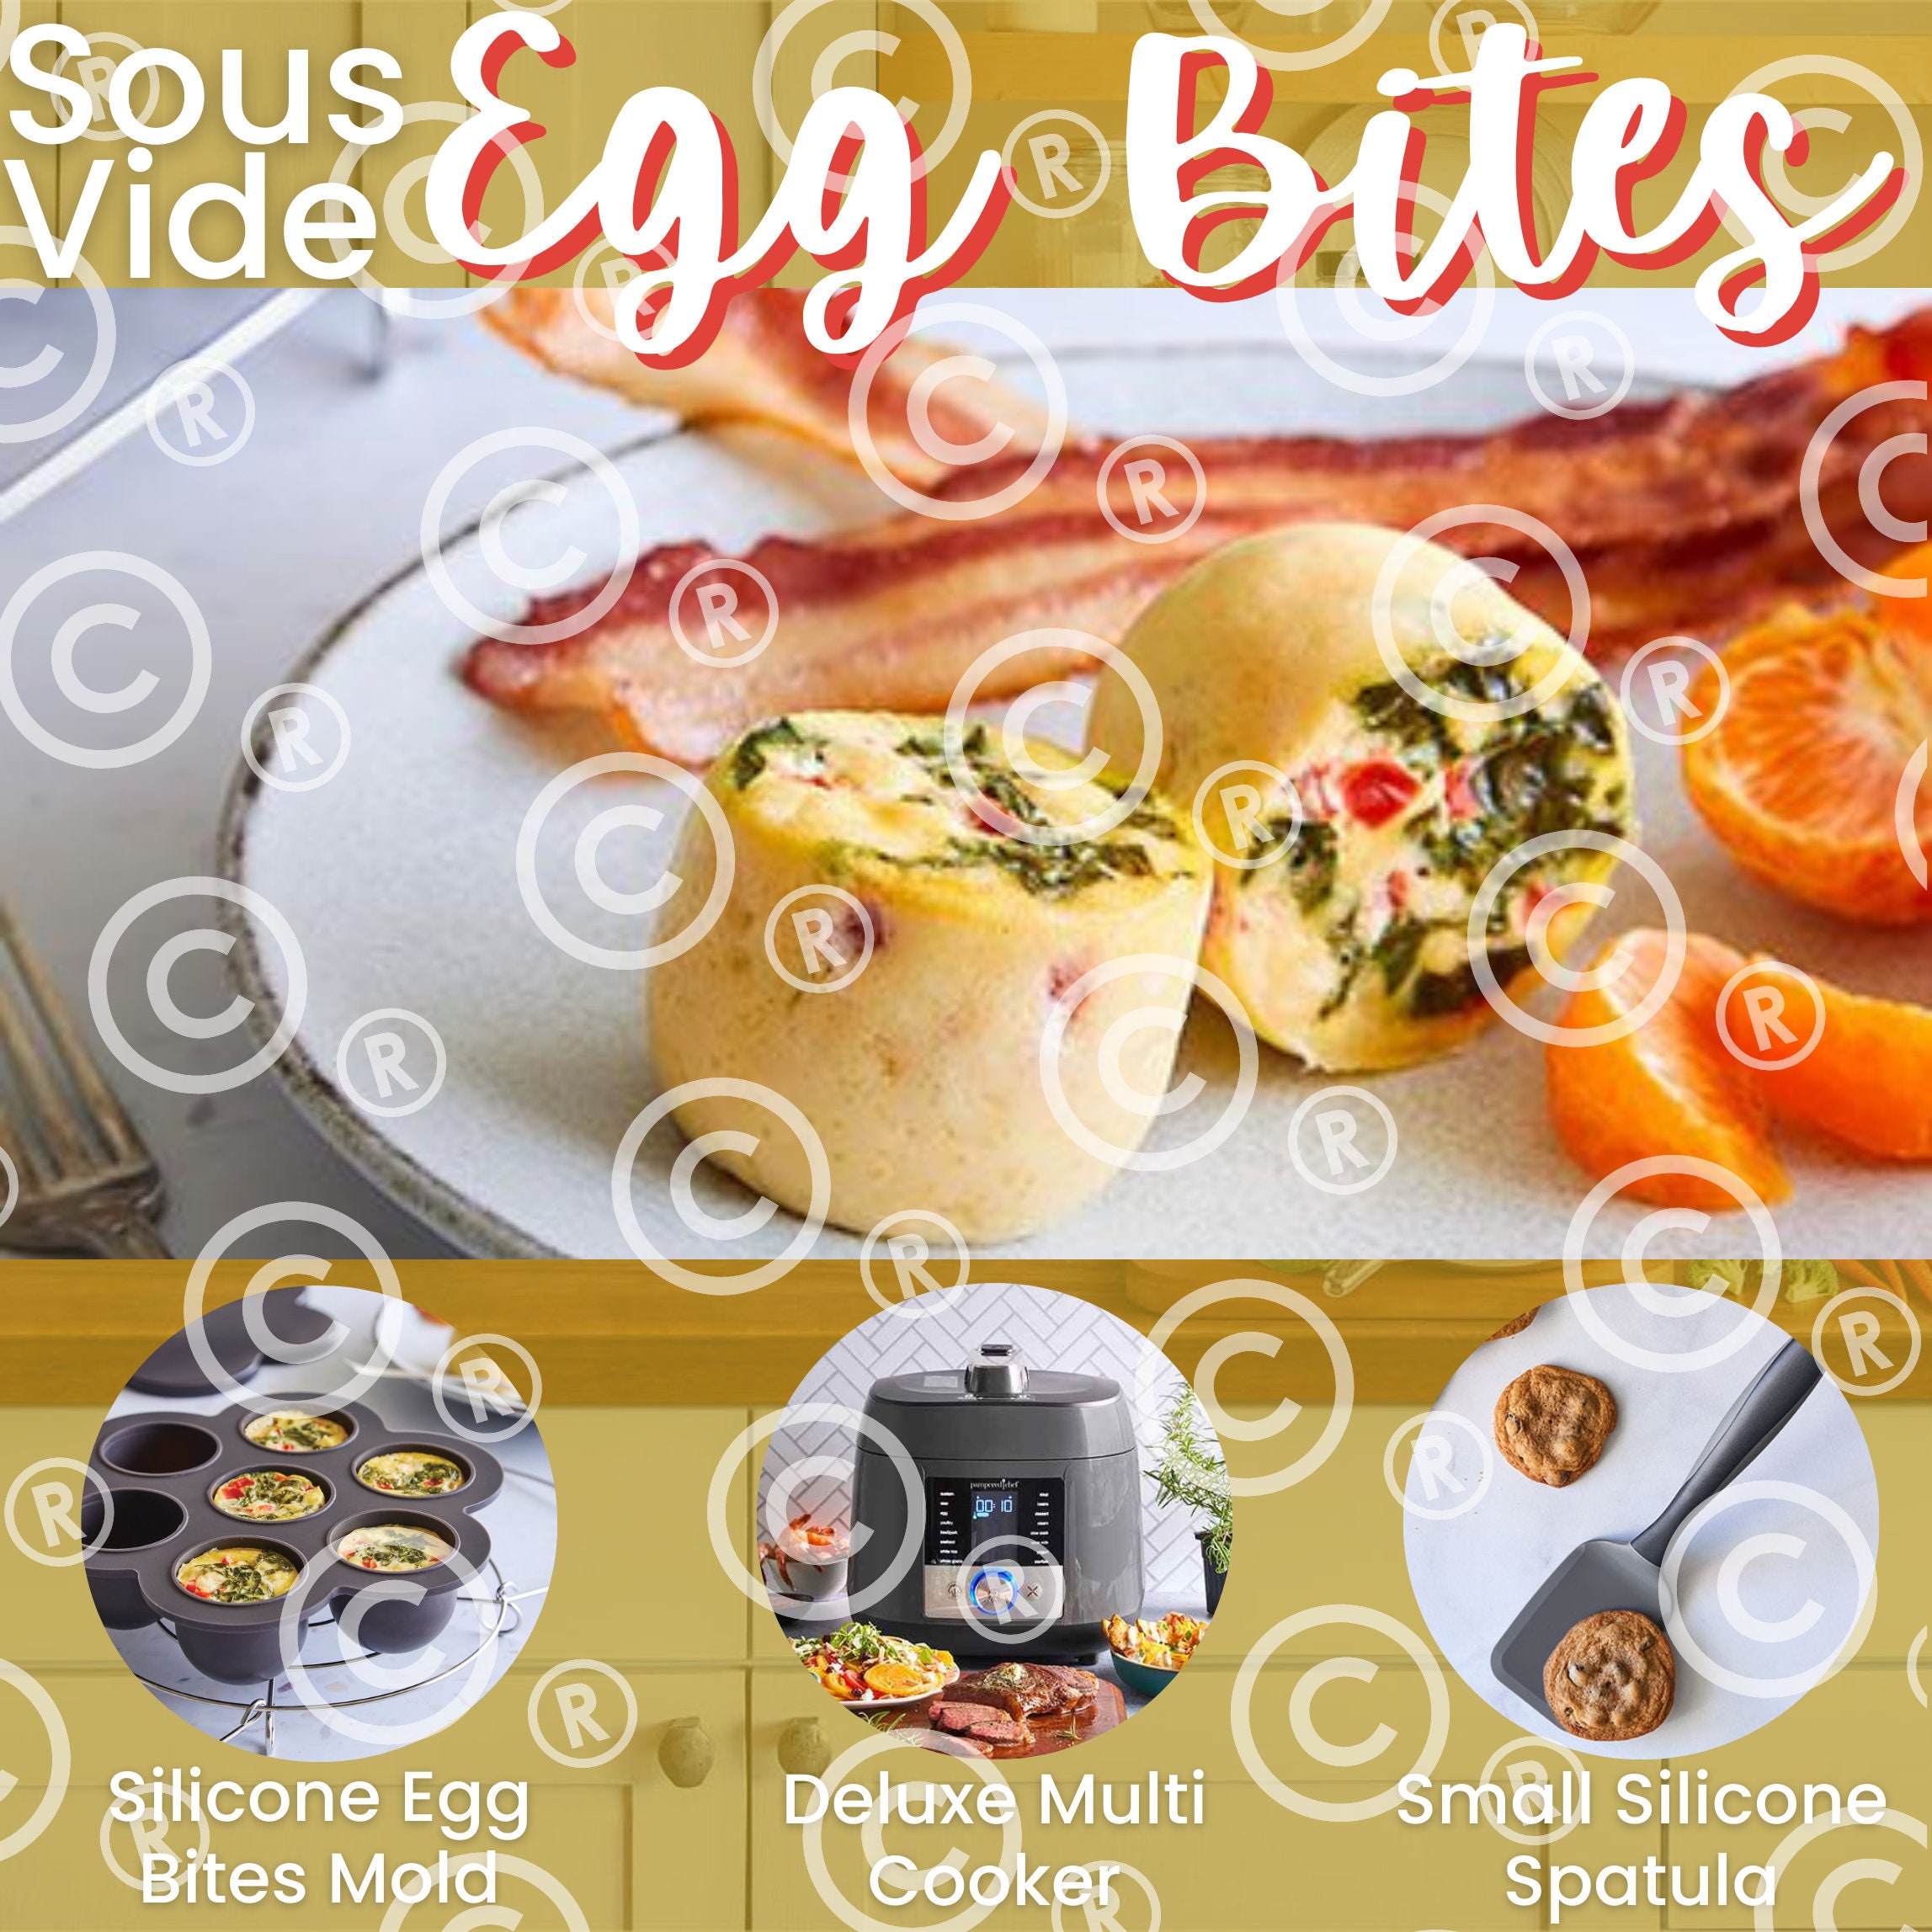 Sous Vide Egg Bites with Deluxe Multi Cooker - Pampered Chef